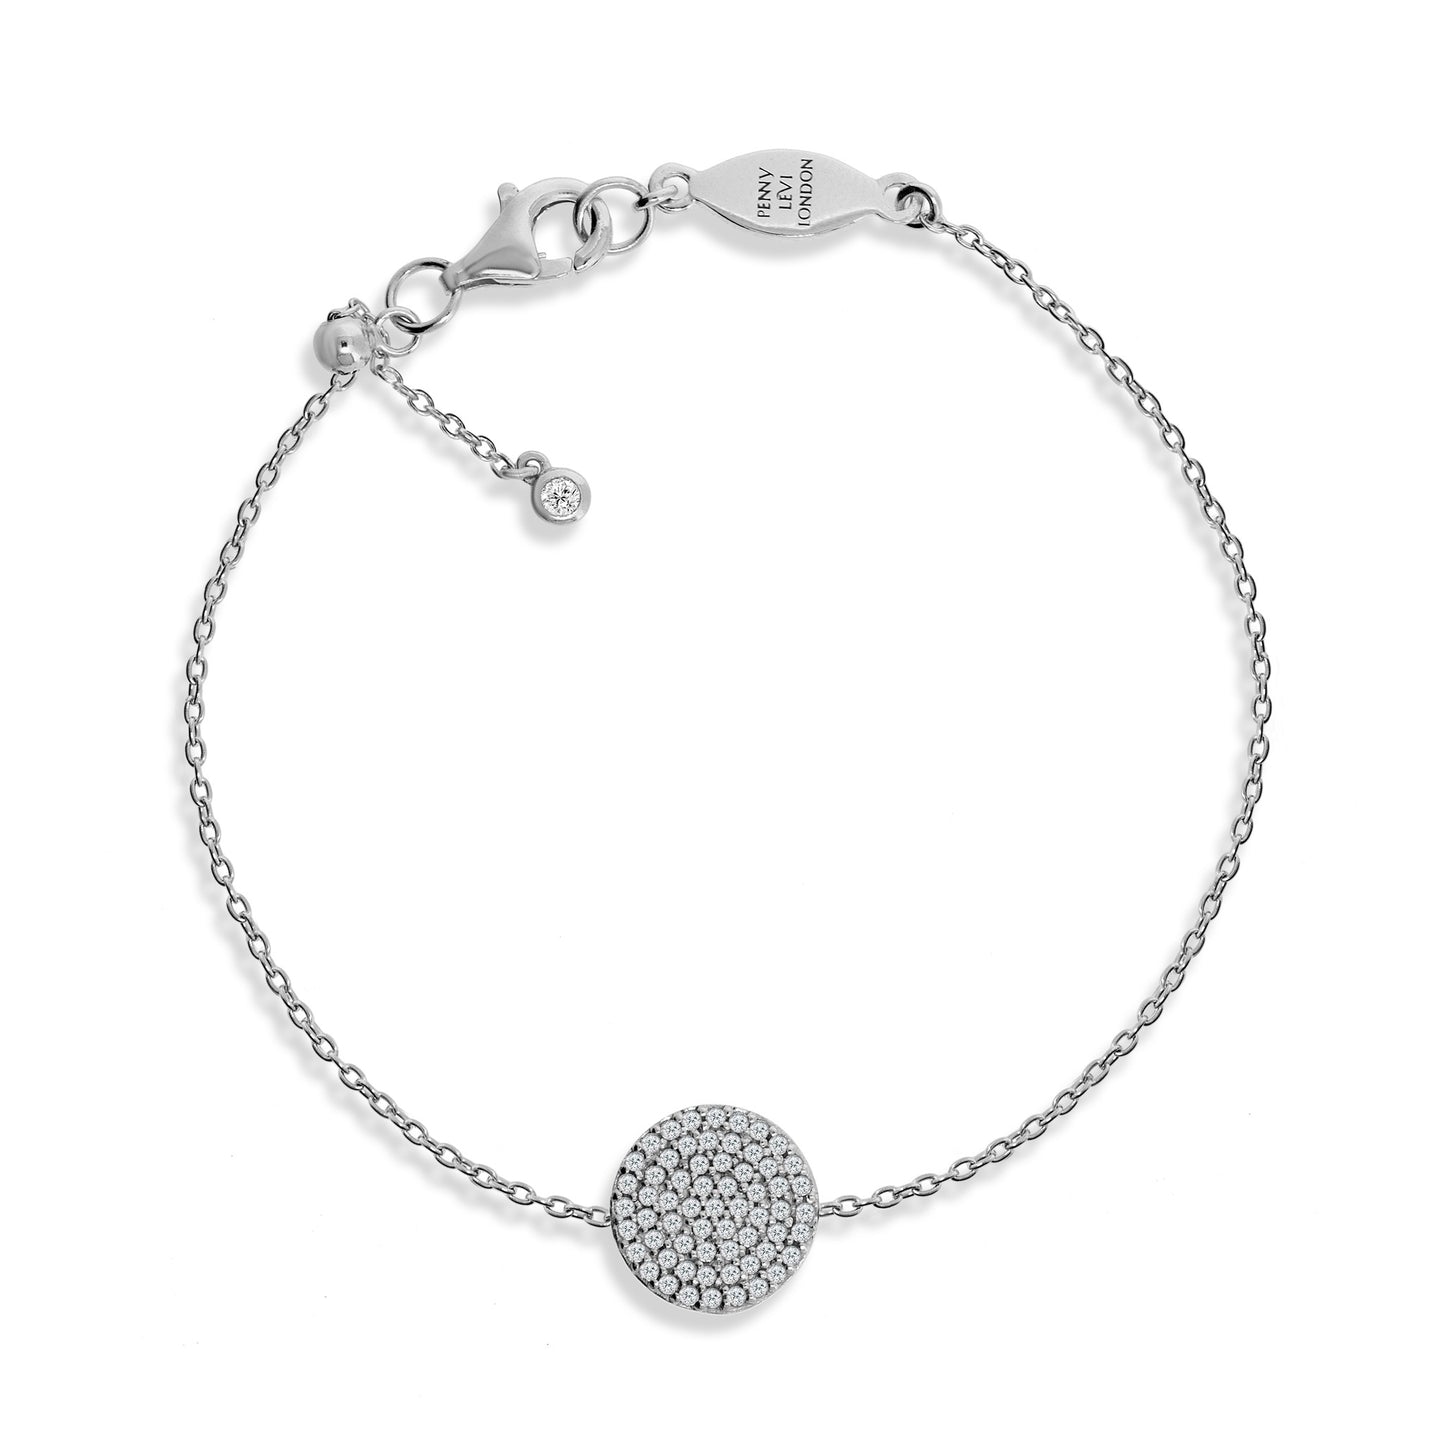 
Sterling silver chain bracelet with pave disc and adjustable sliding ball clasp

